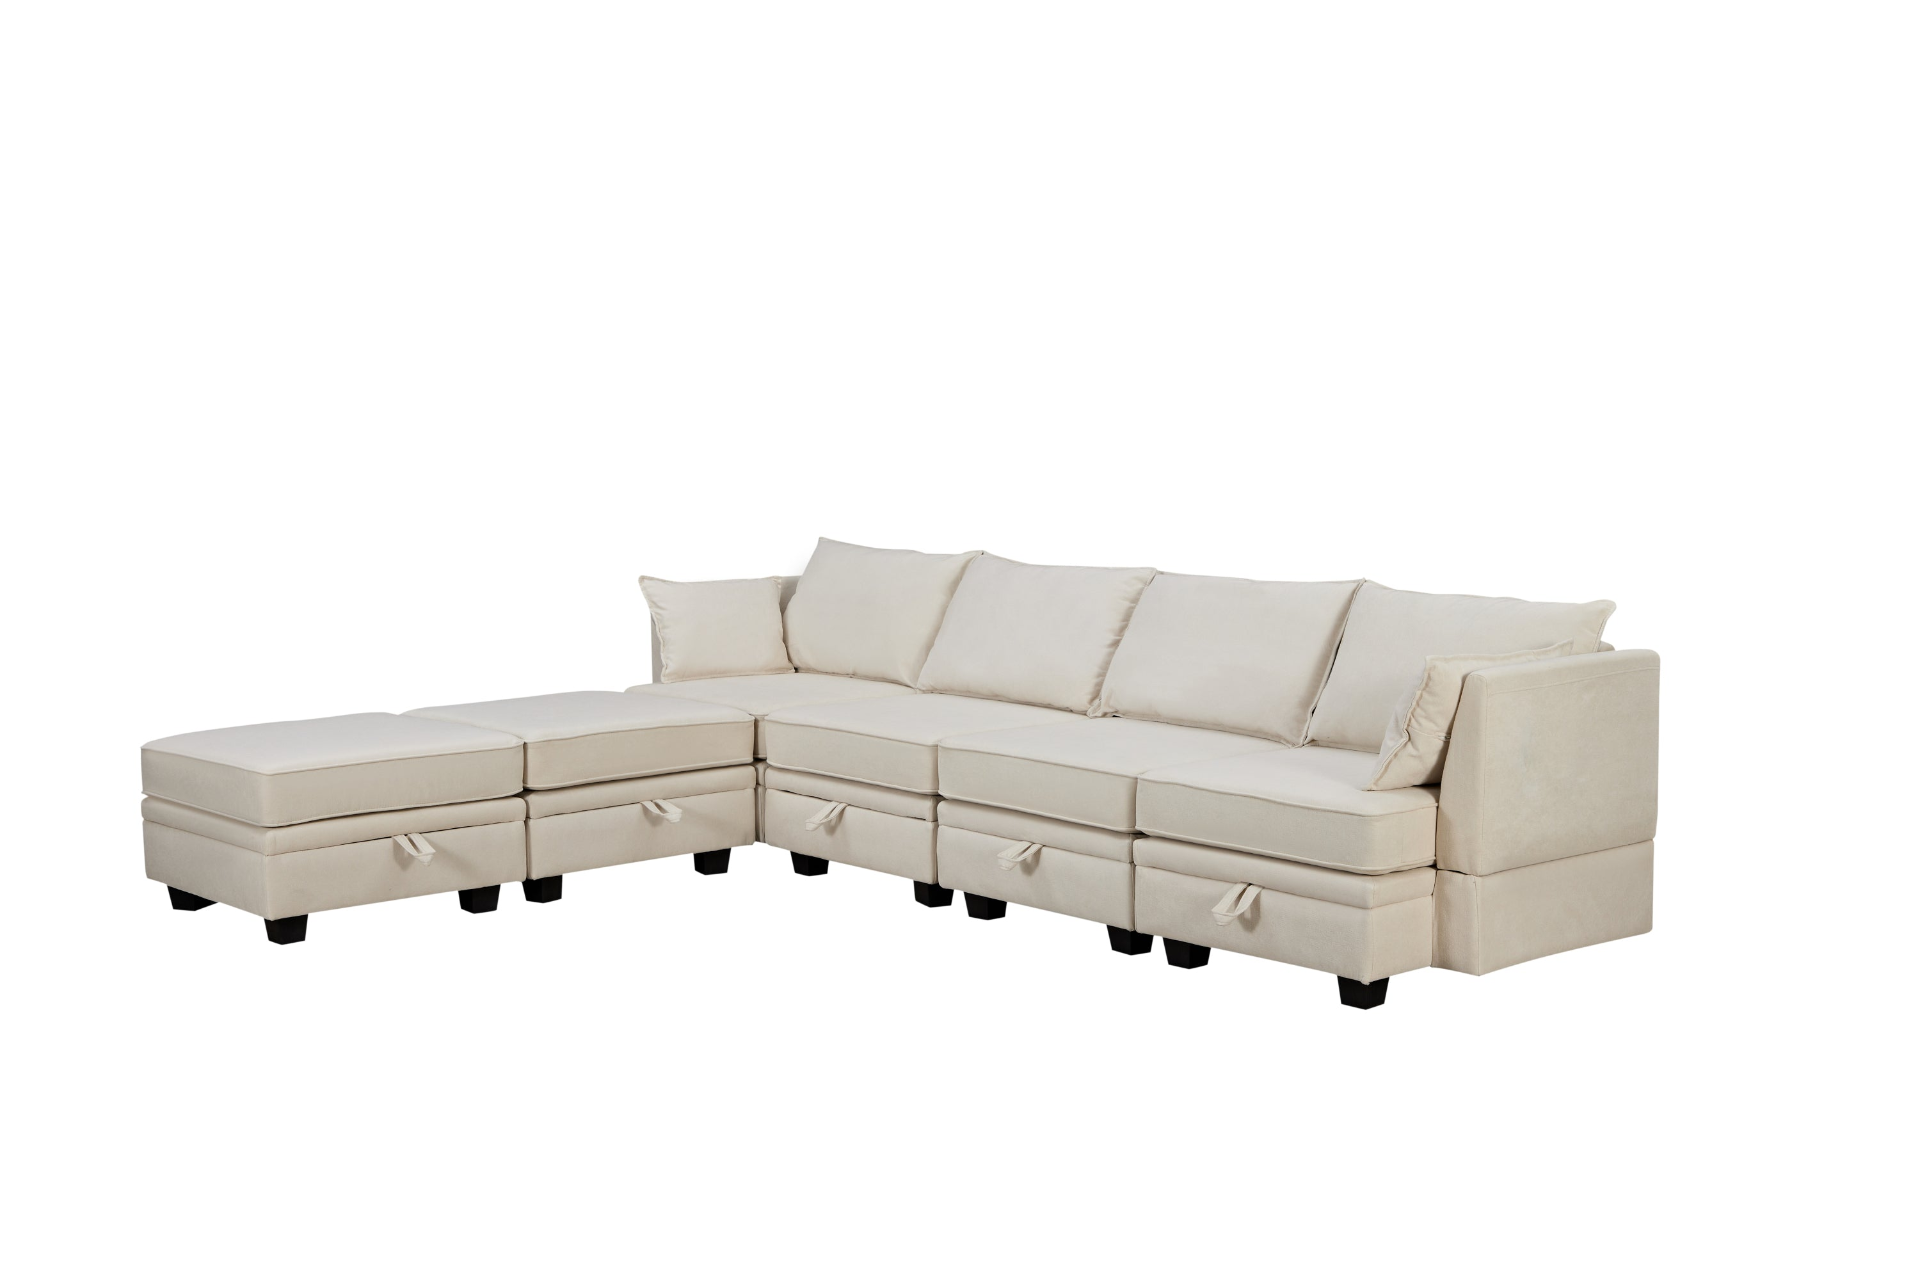 Modern Large U-Shape Modular Sectional Sofa,  Convertible Sofa Bed with Reversible Chaise for Living Room, Storage Seat - 33943059_large_0c6bc2ec-20ed-4fca-9300-20af8effb650